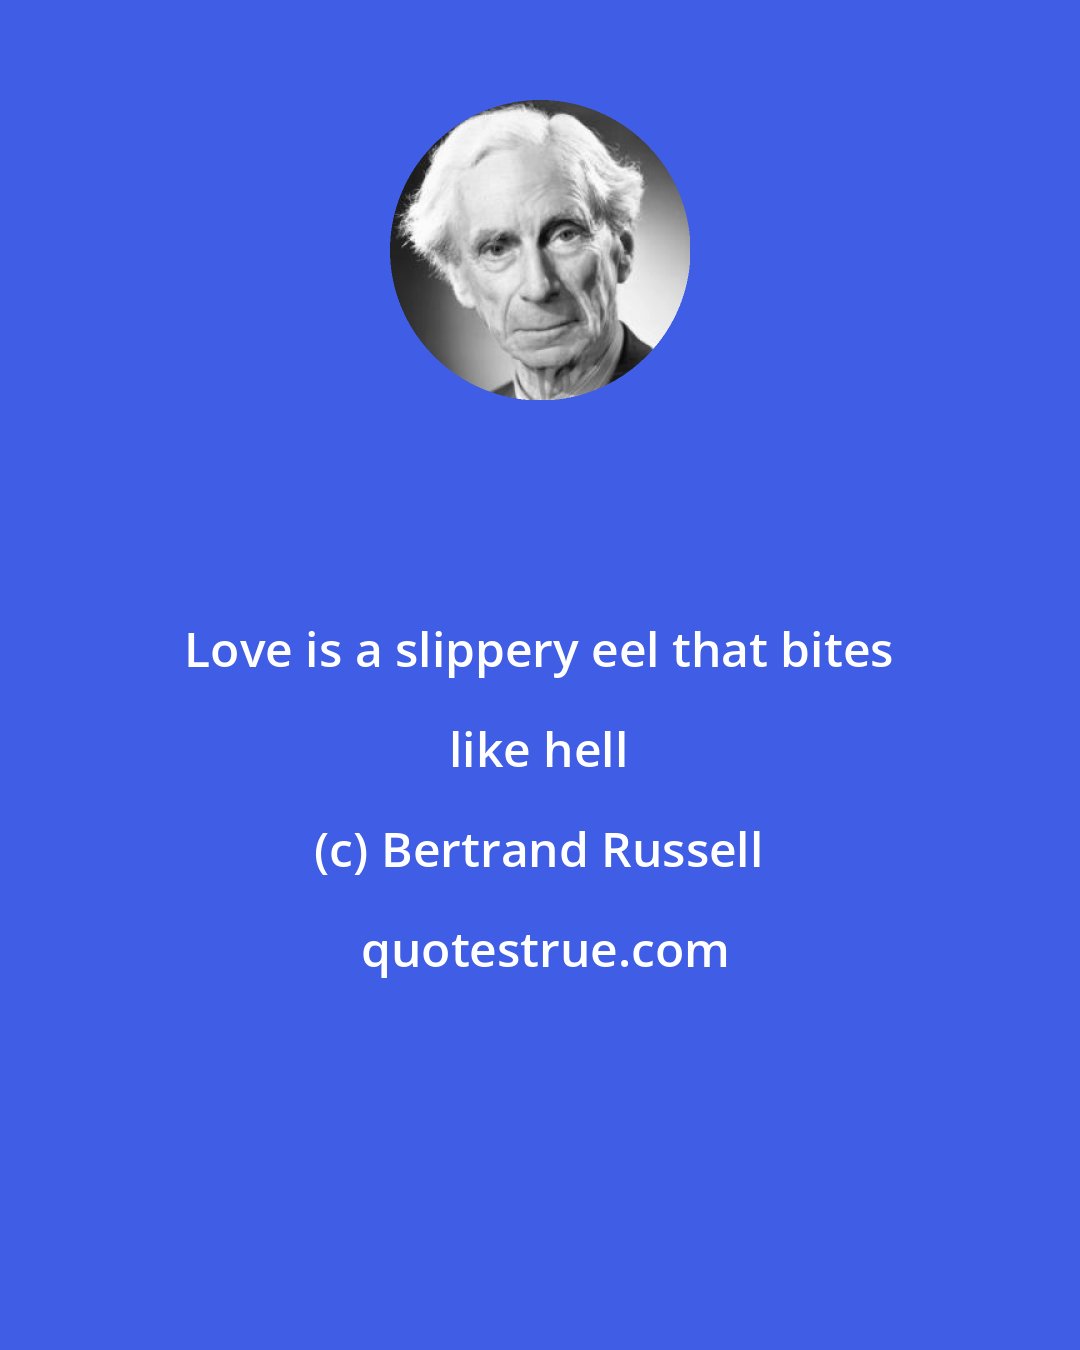 Bertrand Russell: Love is a slippery eel that bites like hell